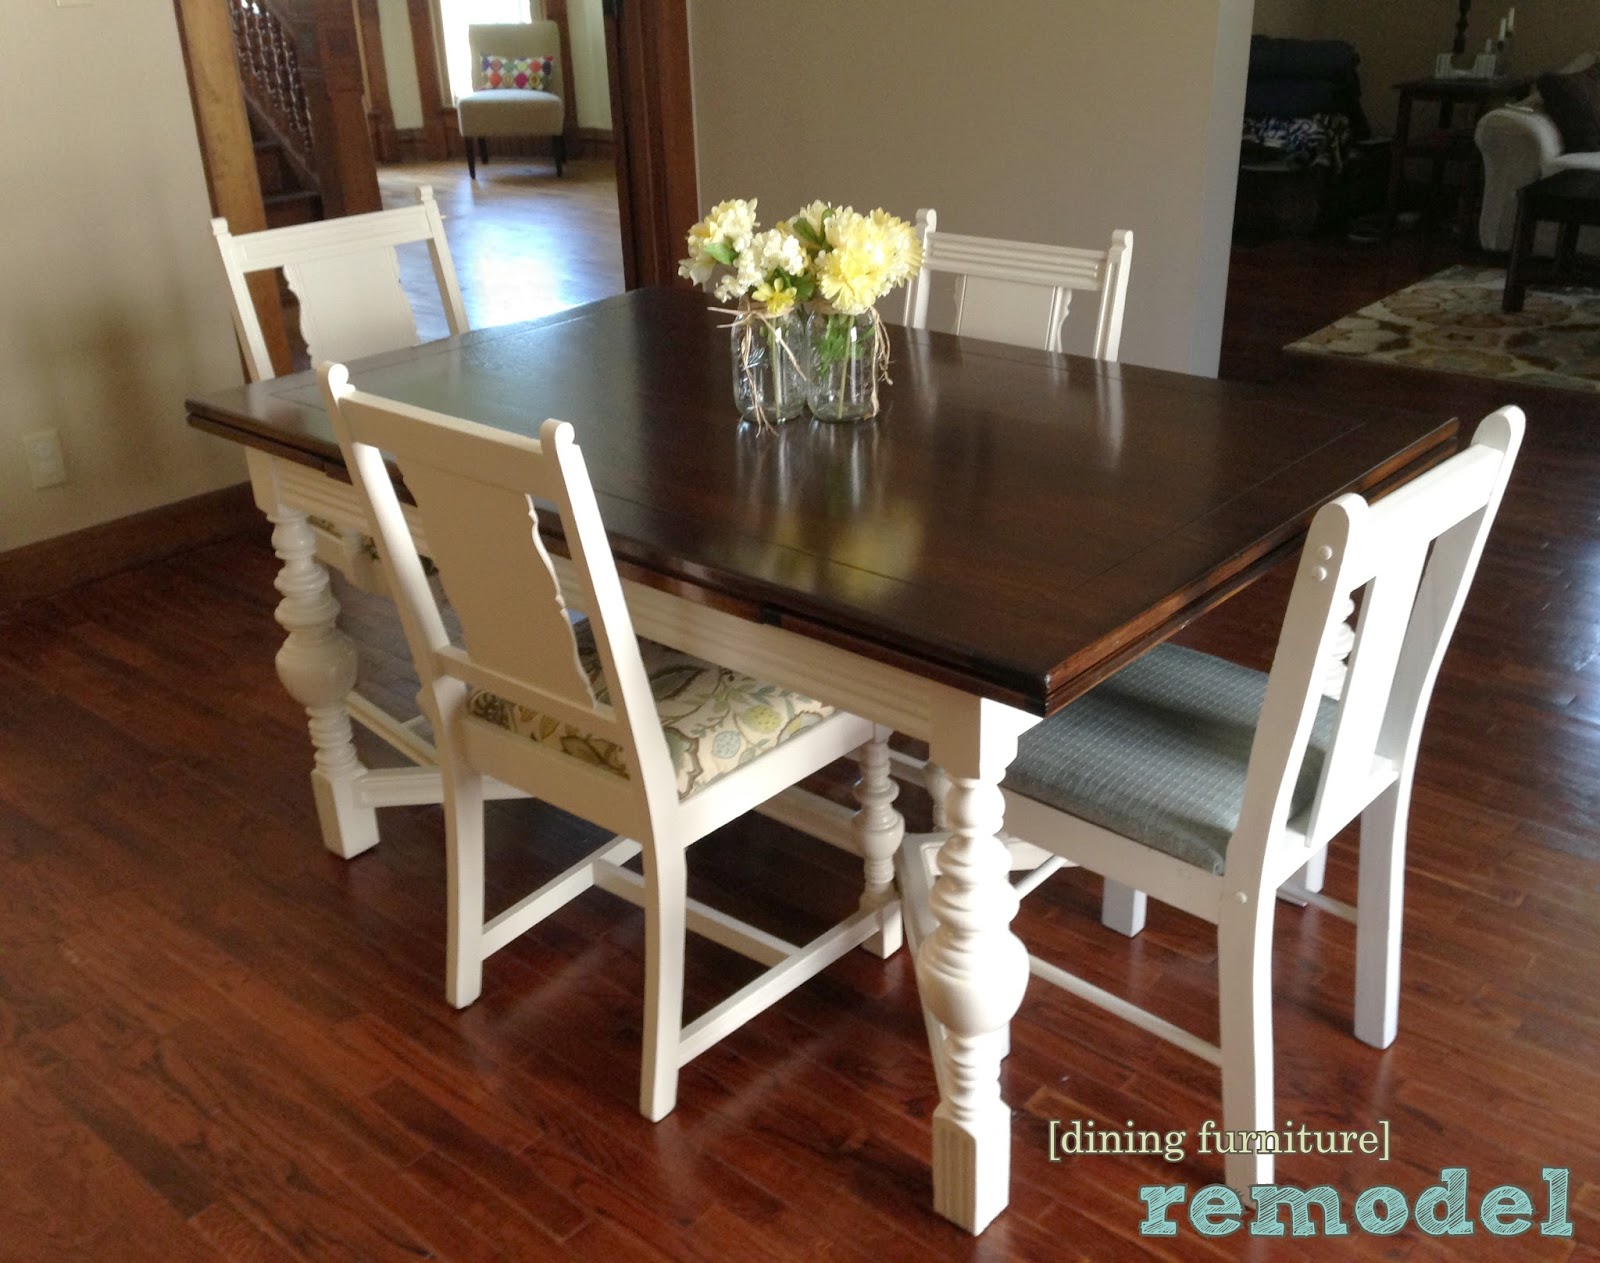 The Copper Coconut Dining Table And Chairs Redo